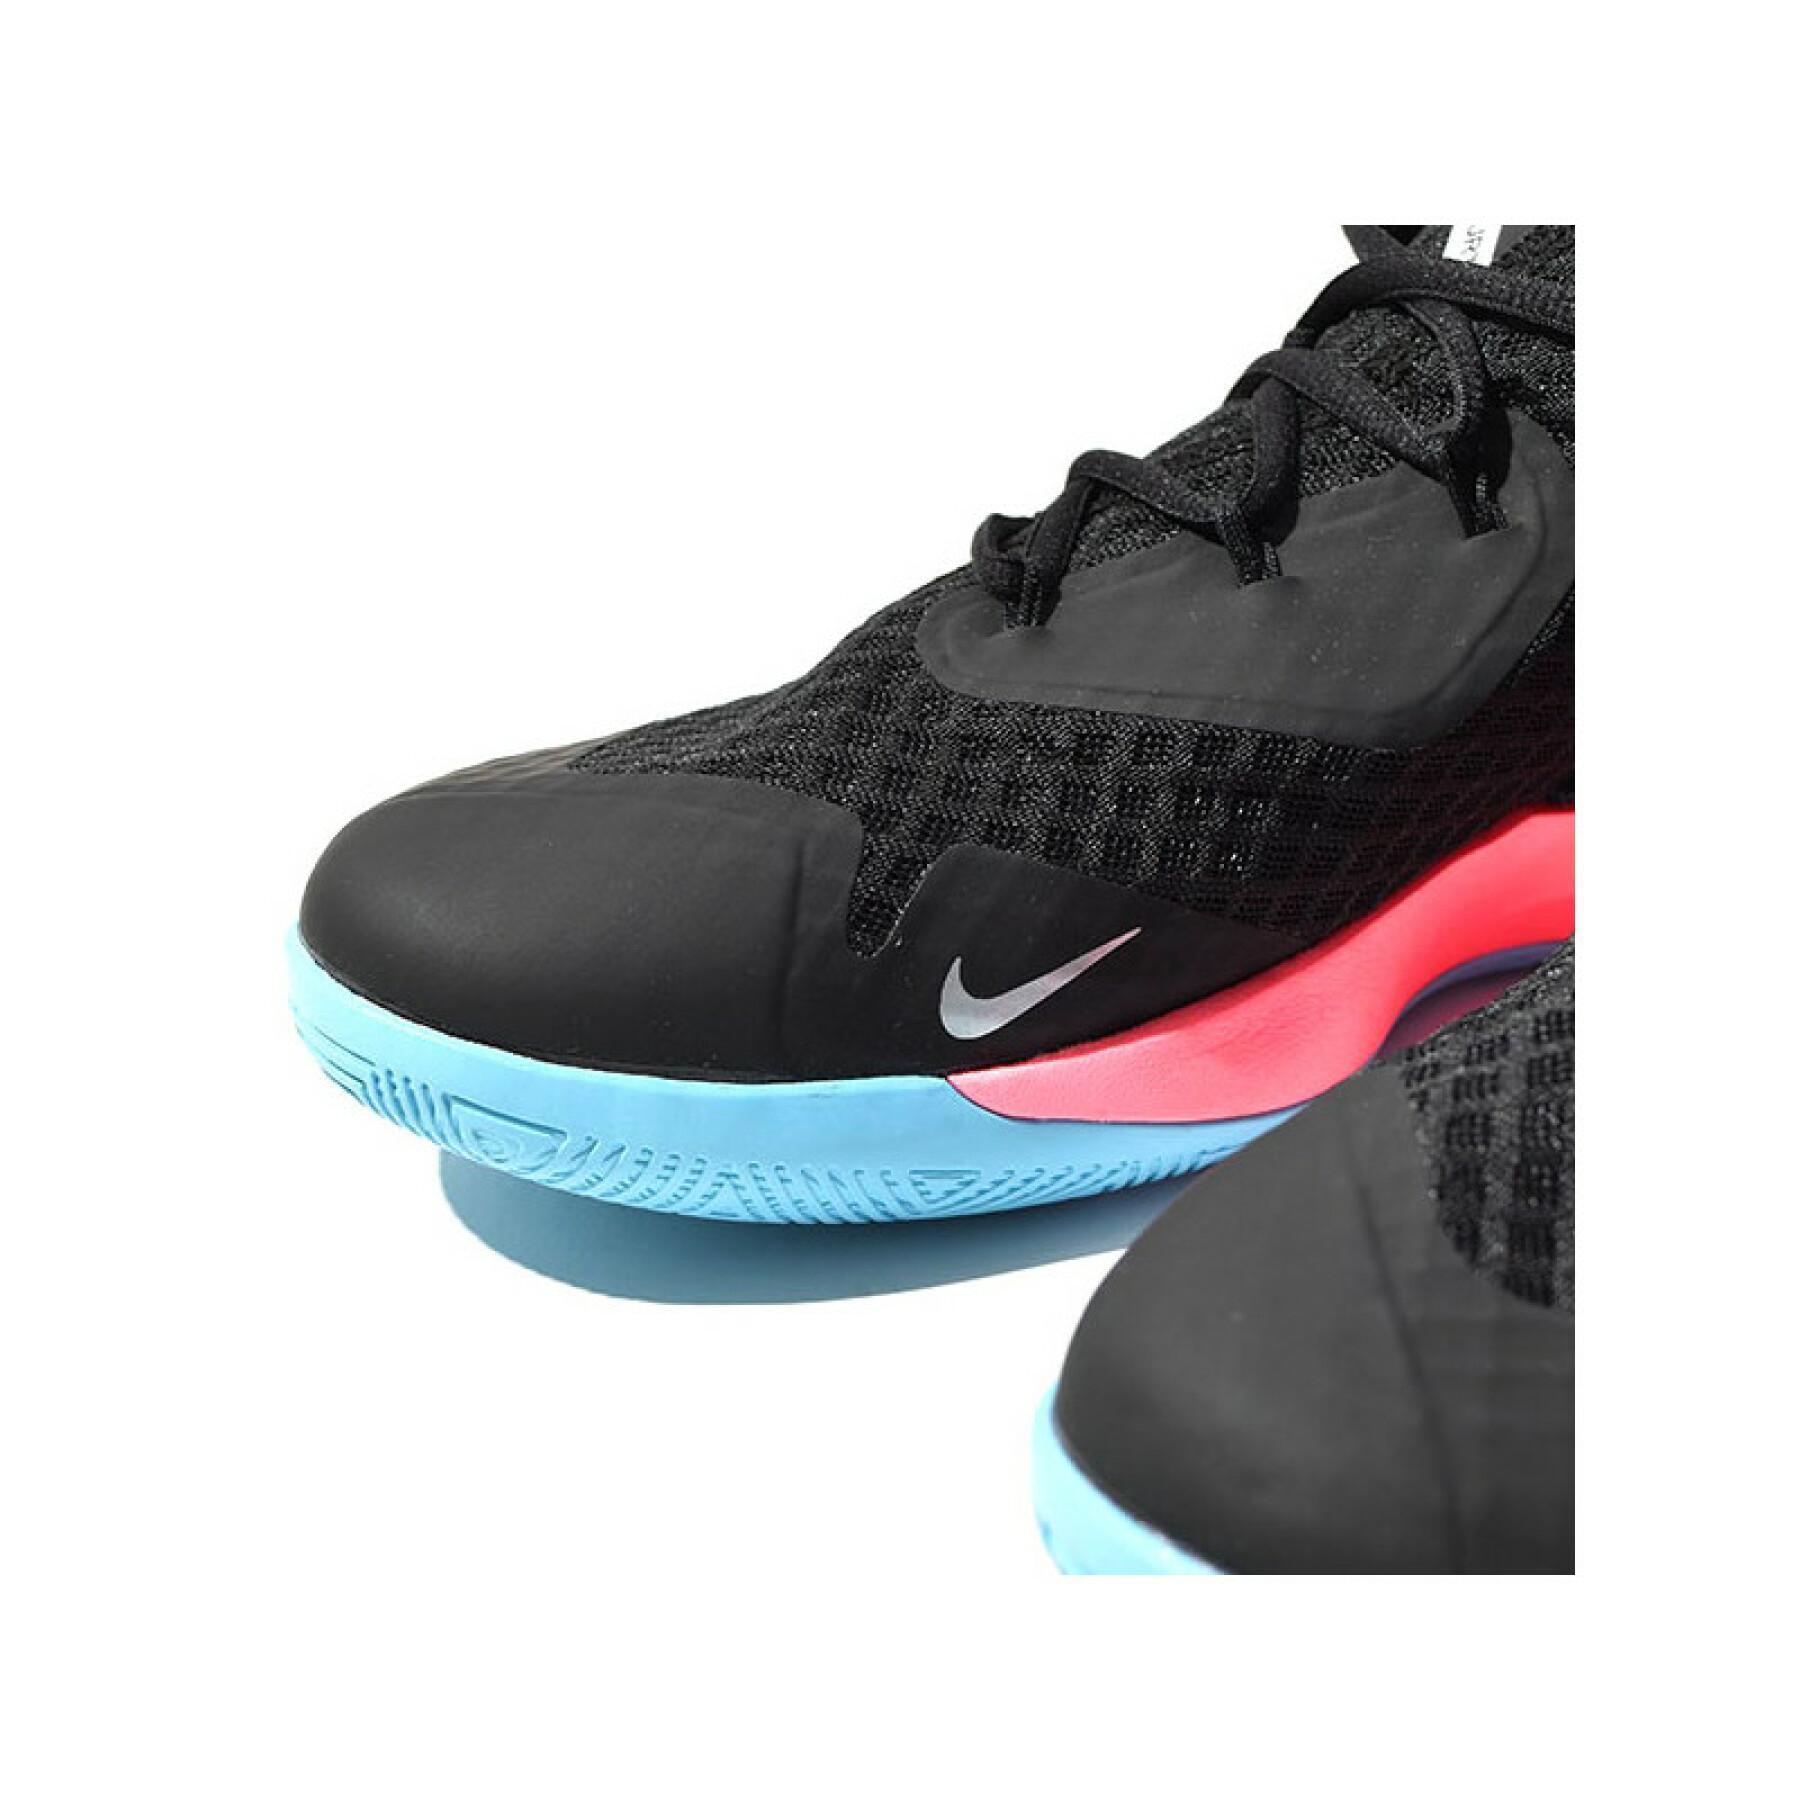 Shoes Nike Zoom Hyperspeed Court 